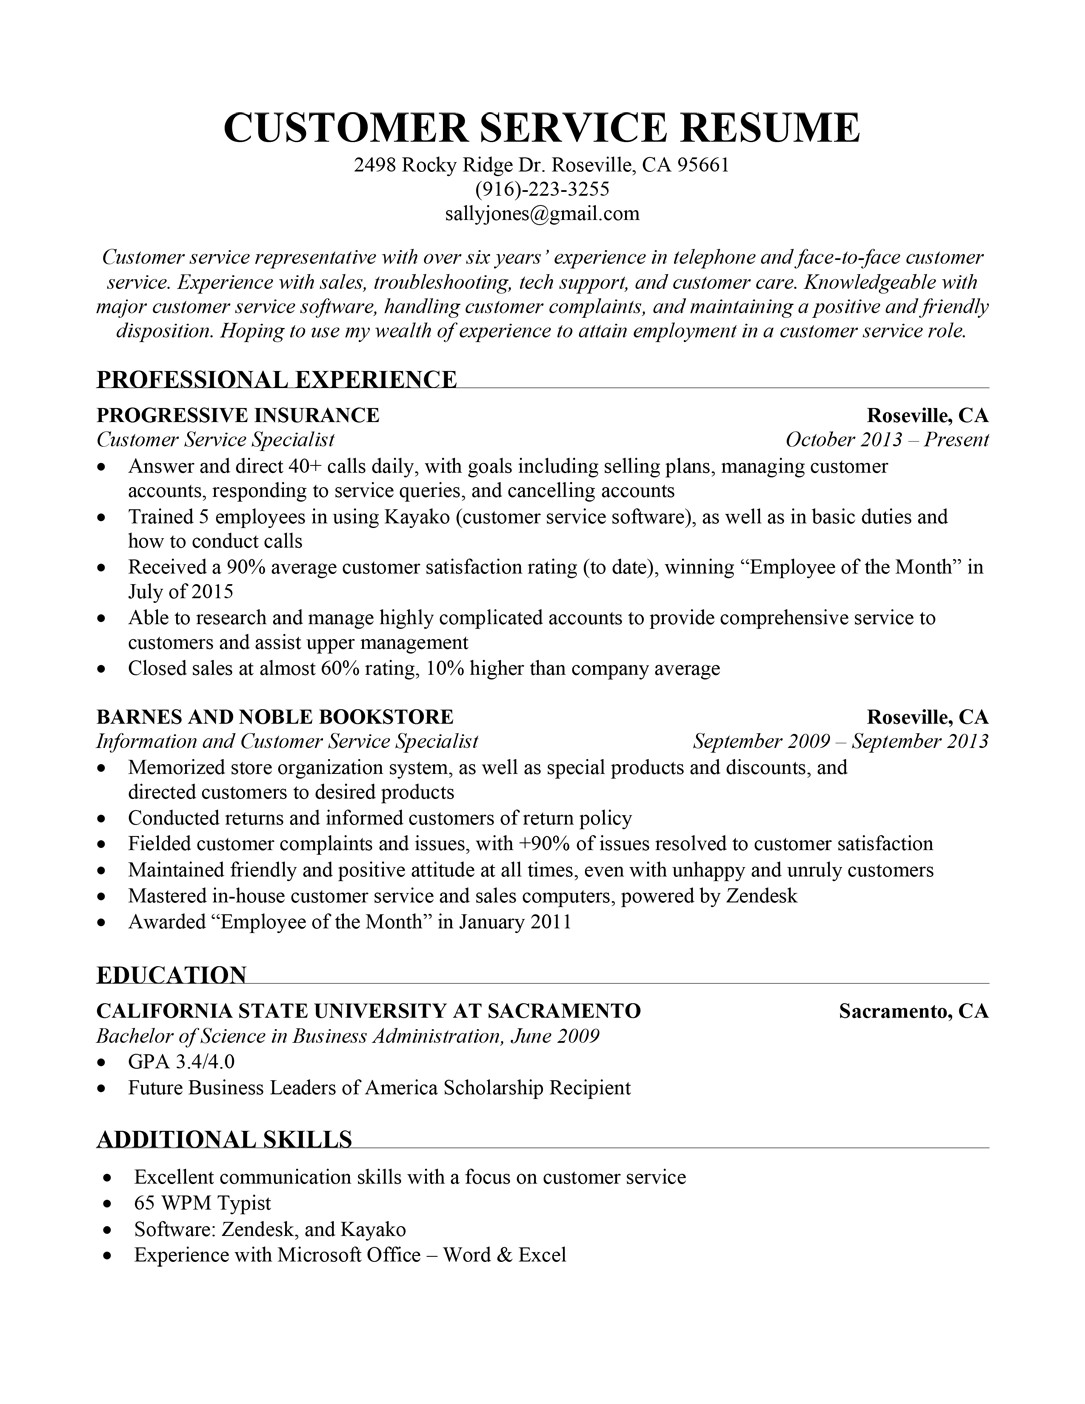 Samples Of Objectives for Customer Service Resumes Customer Service Resume Sample Resume Panion